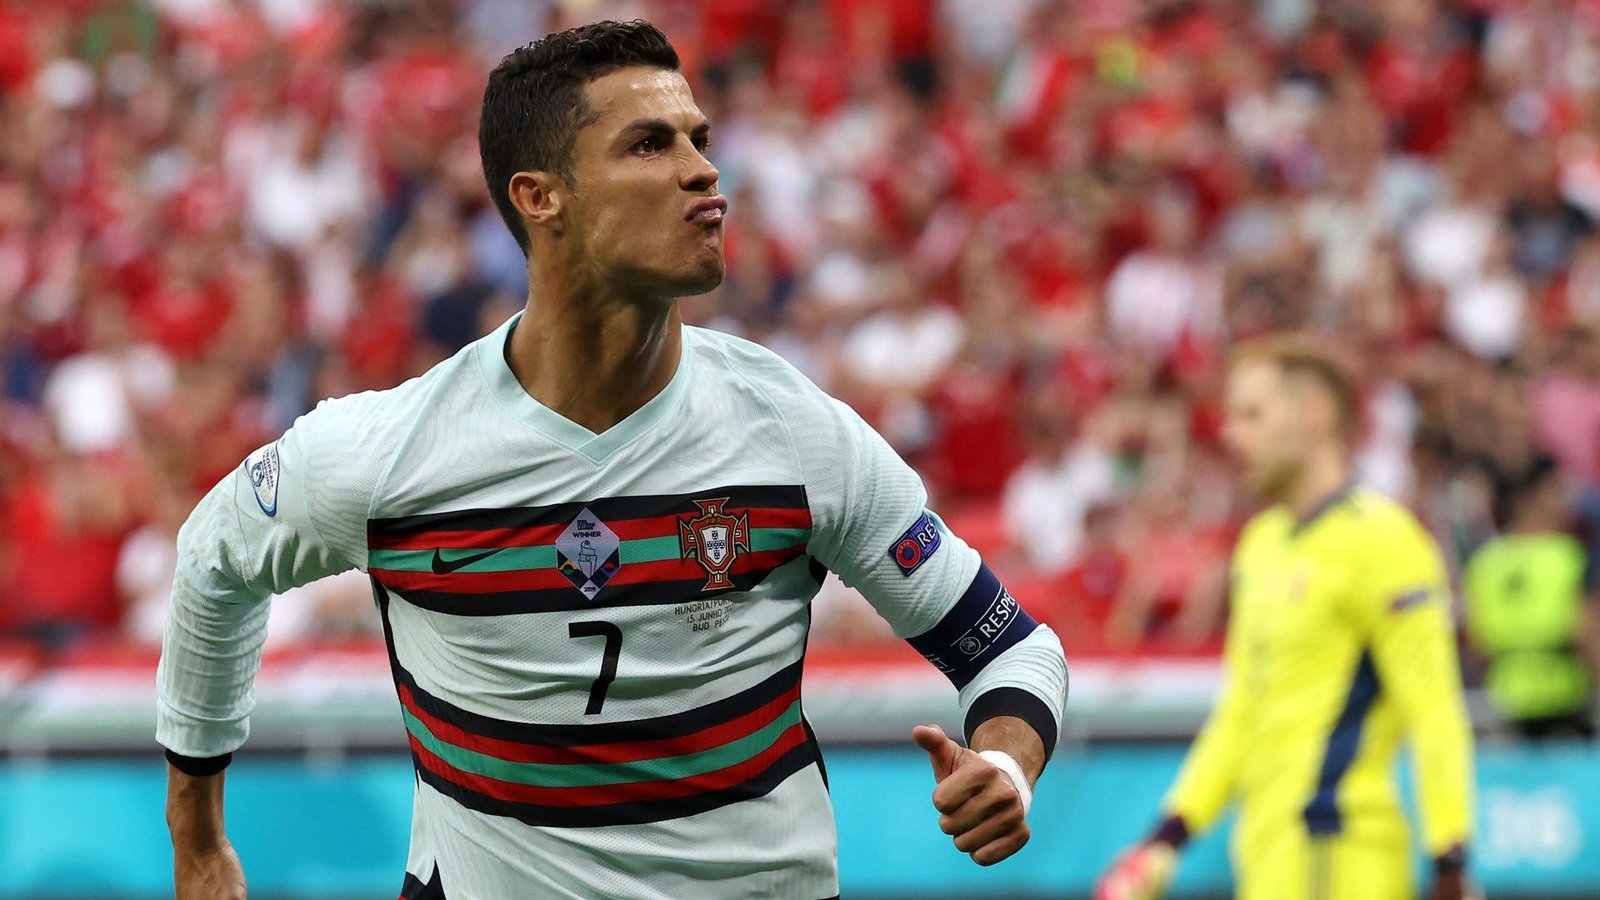 List of countries against whom Cristiano Ronaldo has scored the most